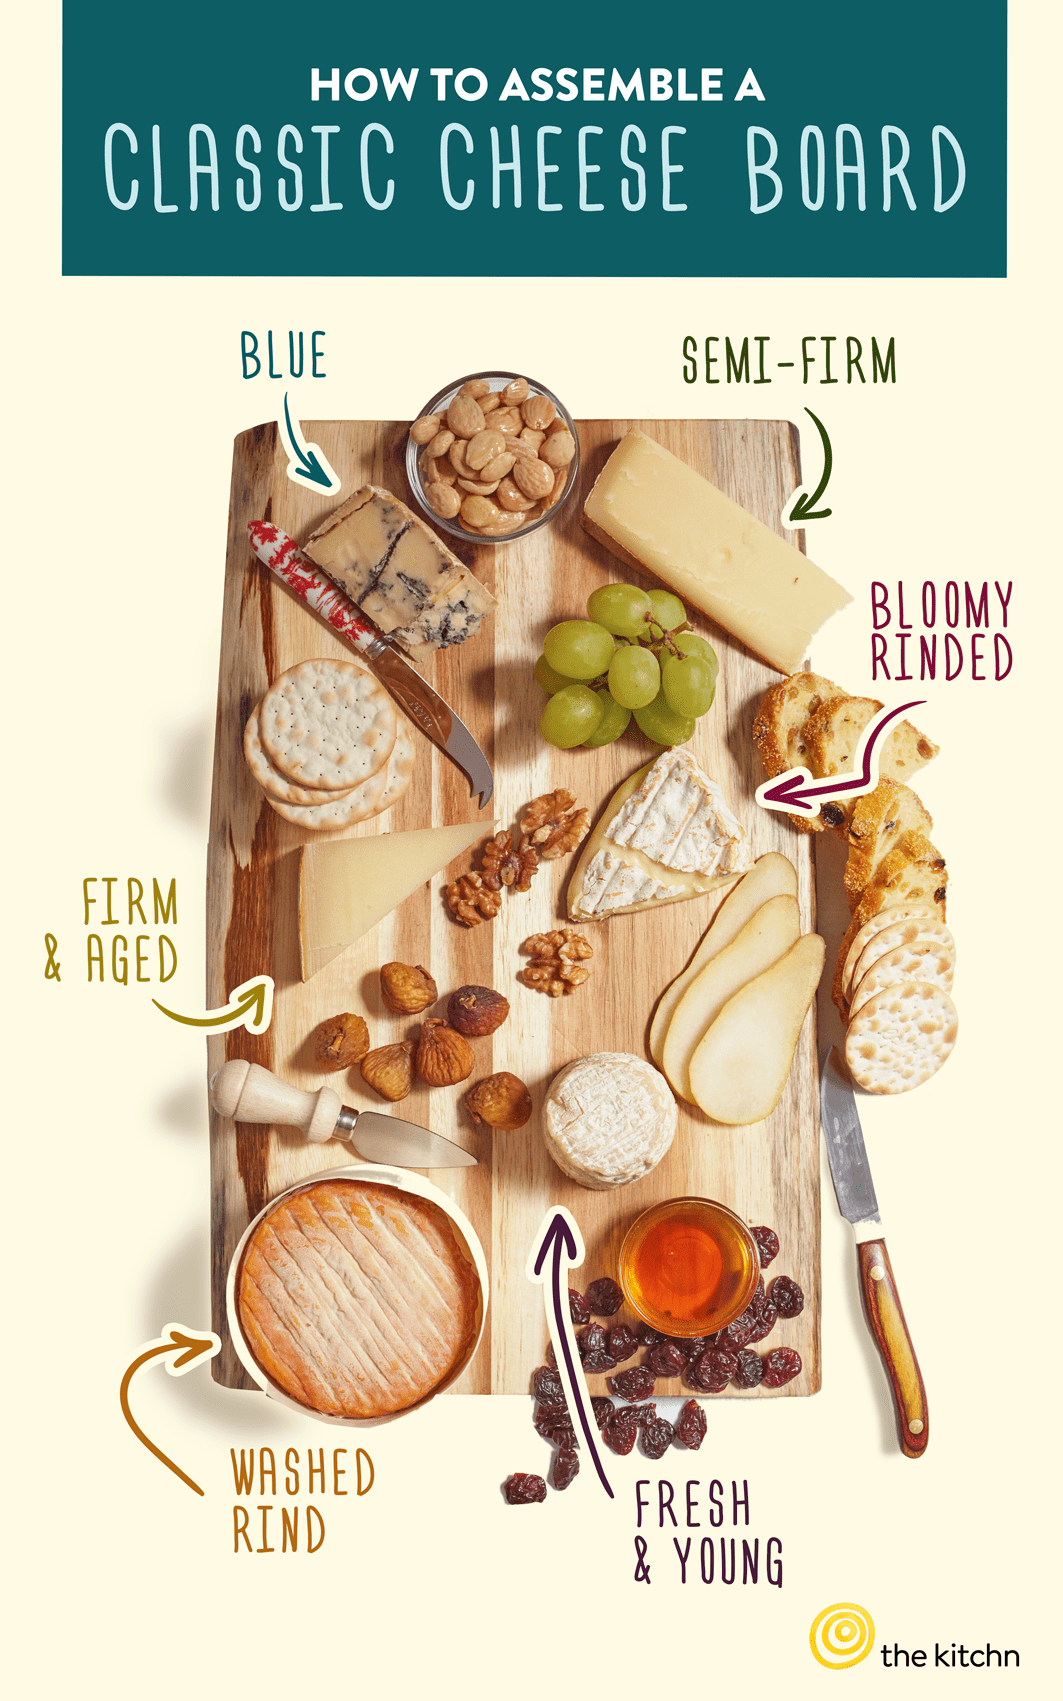 Cheese tips for the home: storage, freezing, and saving rinds